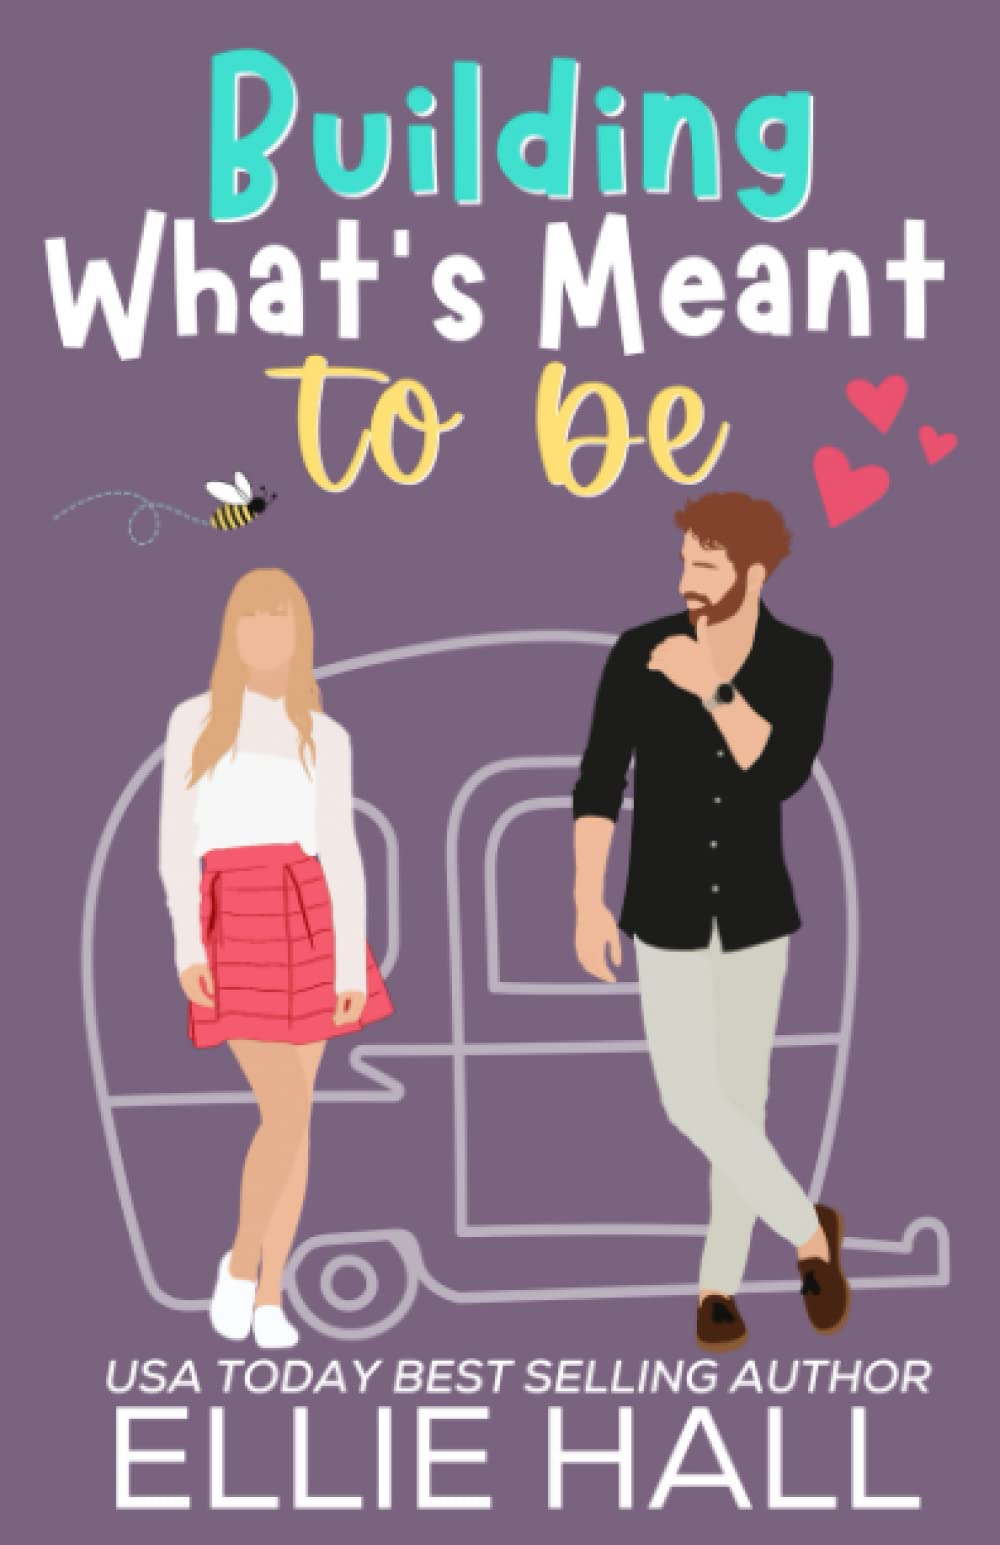 Building What’s Meant to Be by Ellie Hall PDF Download